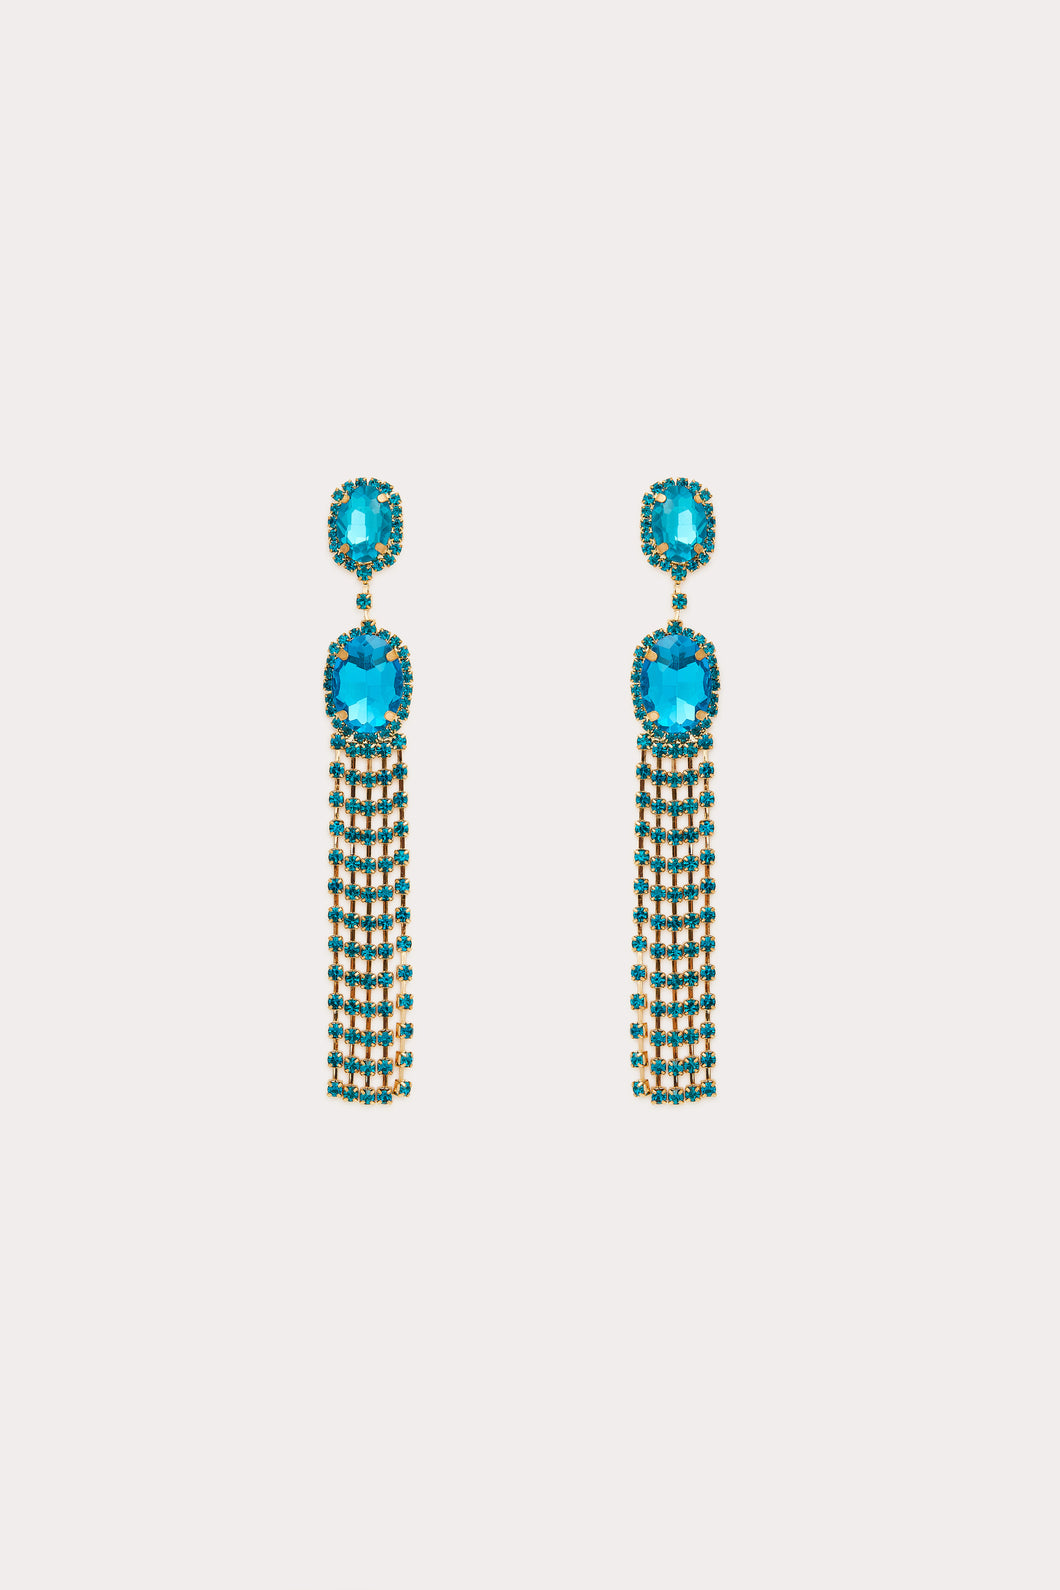 Introducing our exquisite French Blue Chandelier Earrings – the epitome of elegance and sophistication. Crafted with meticulous attention to detail, these earrings boast a stunning design that seamlessly combines timeless style with contemporary flair. Constructed with lightweight materials, the French Blue Chandelier Earrings offer a comfortable and effortless wear. The intricate details and fine craftsmanship make these earrings a true work of art.